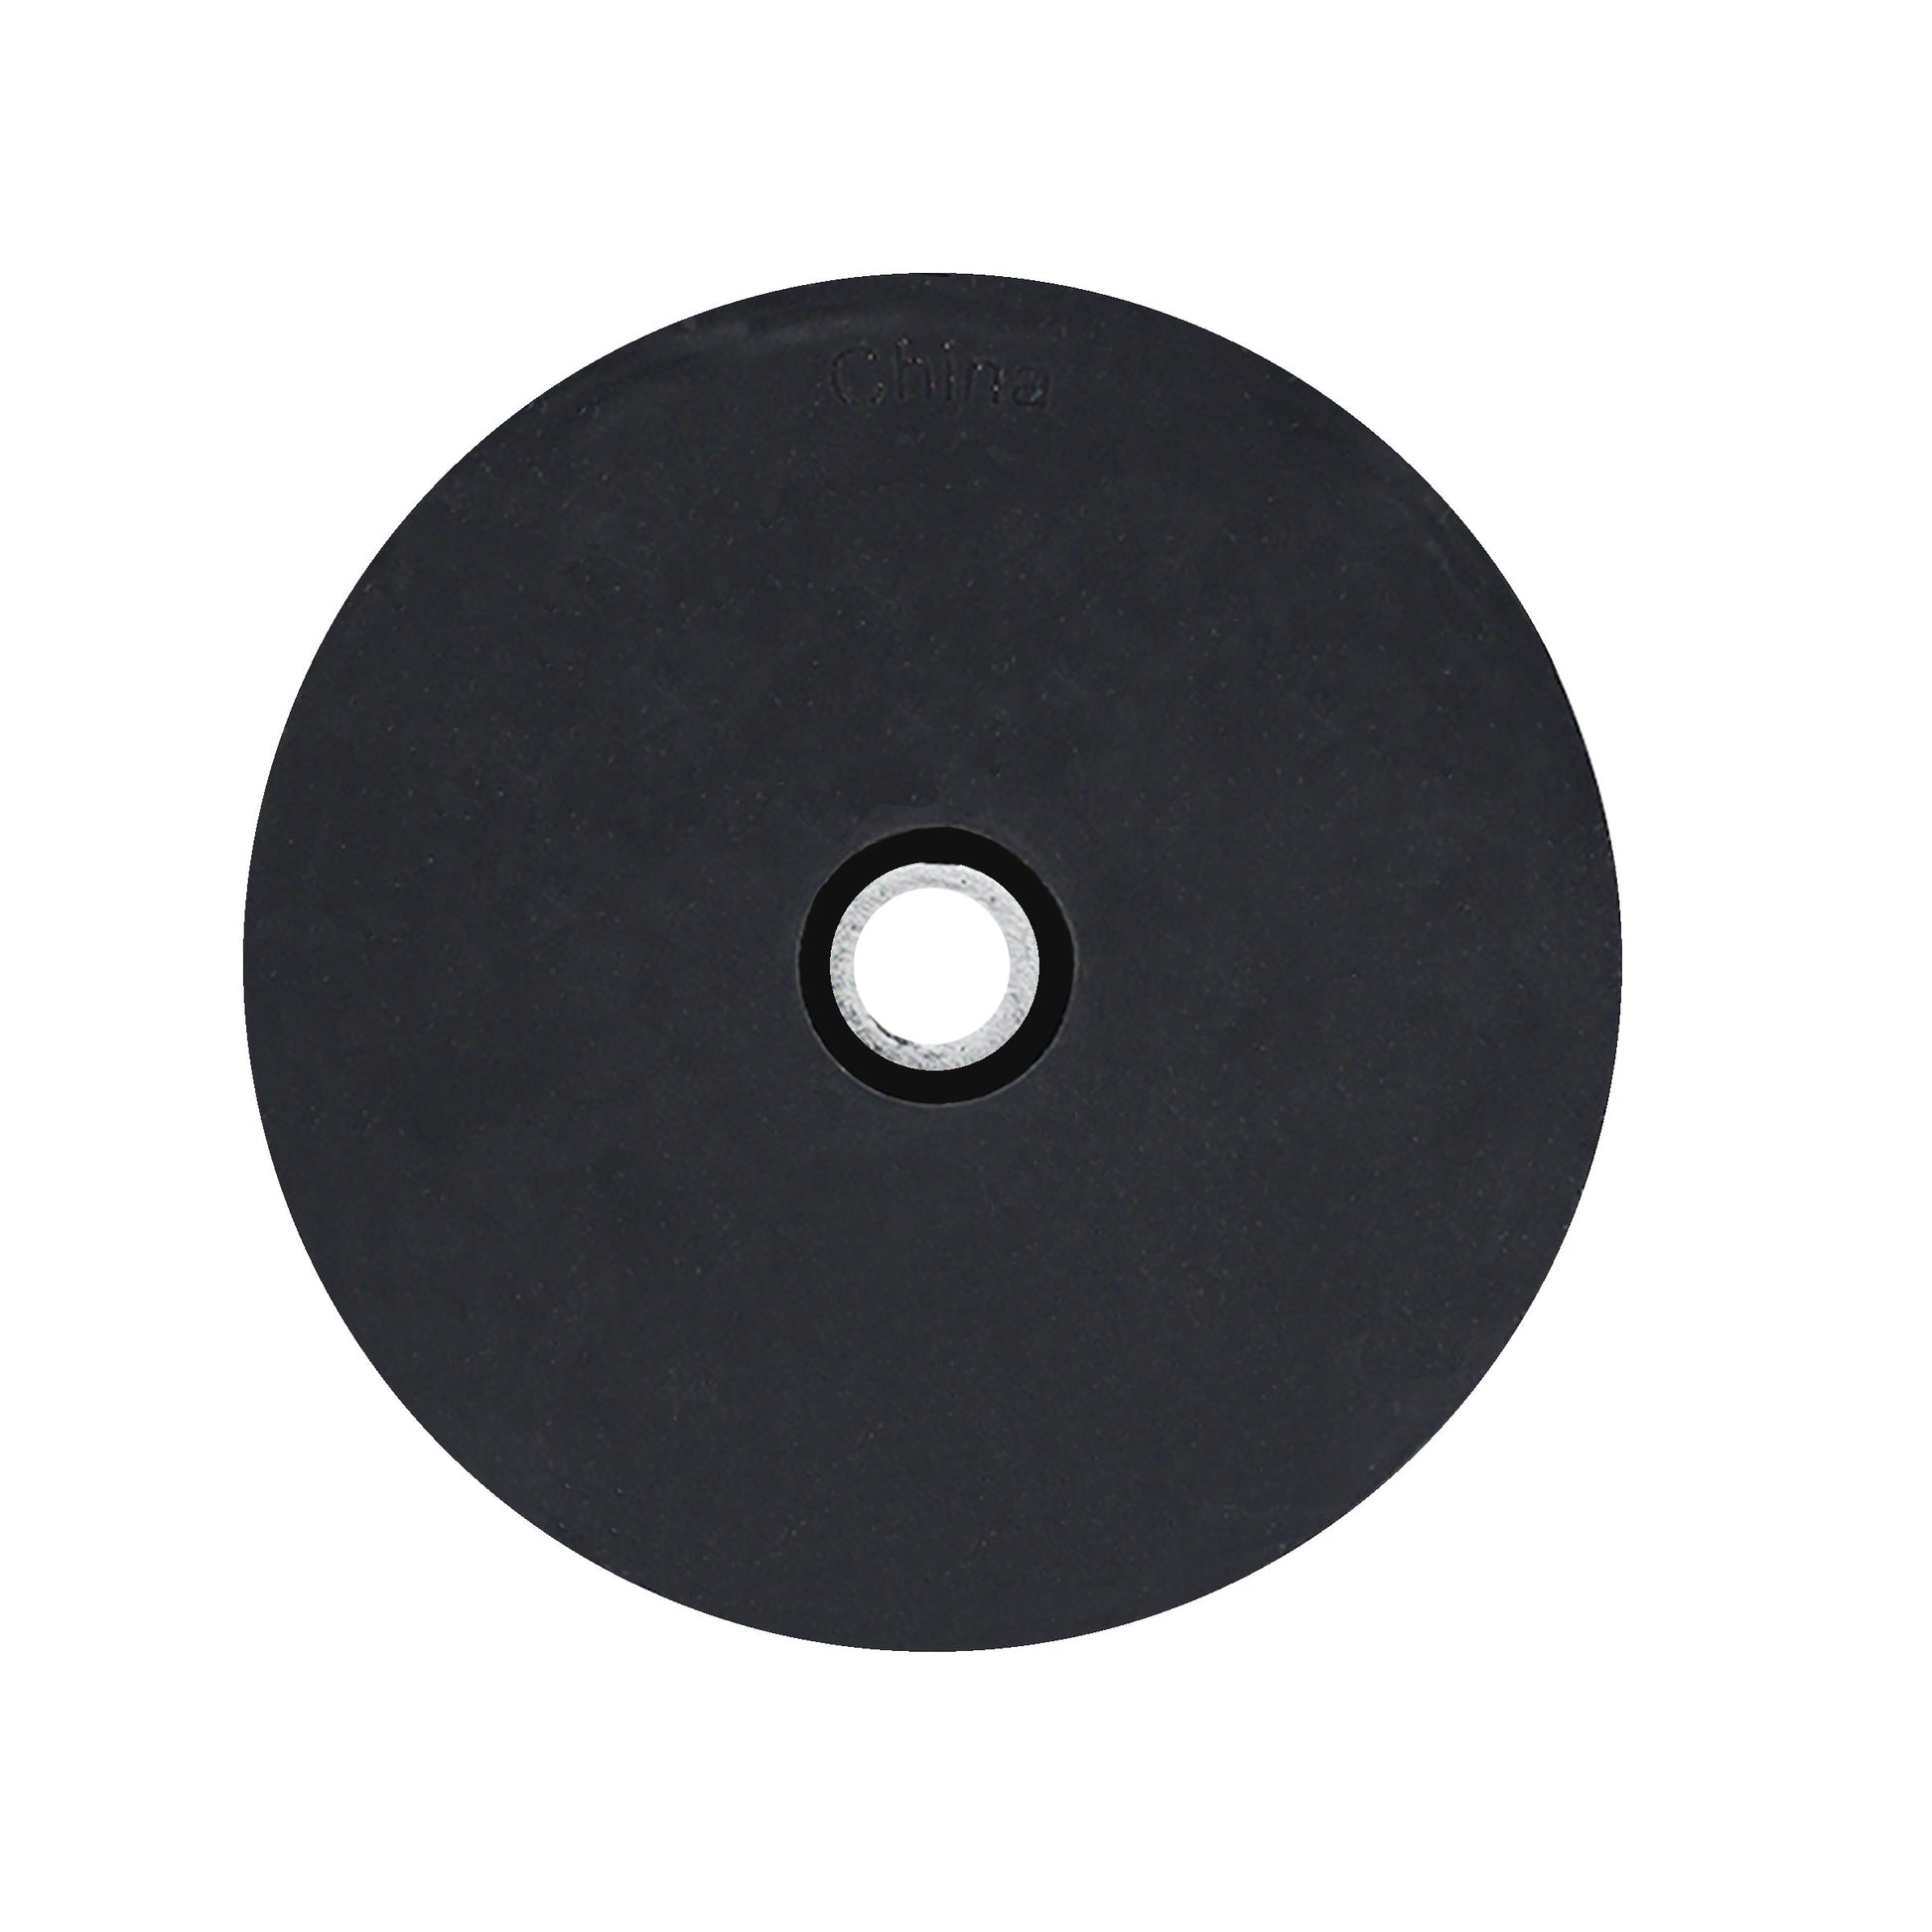 Load image into Gallery viewer, 07625 NeoGrip™ Round Base Magnet - Back of Packaging